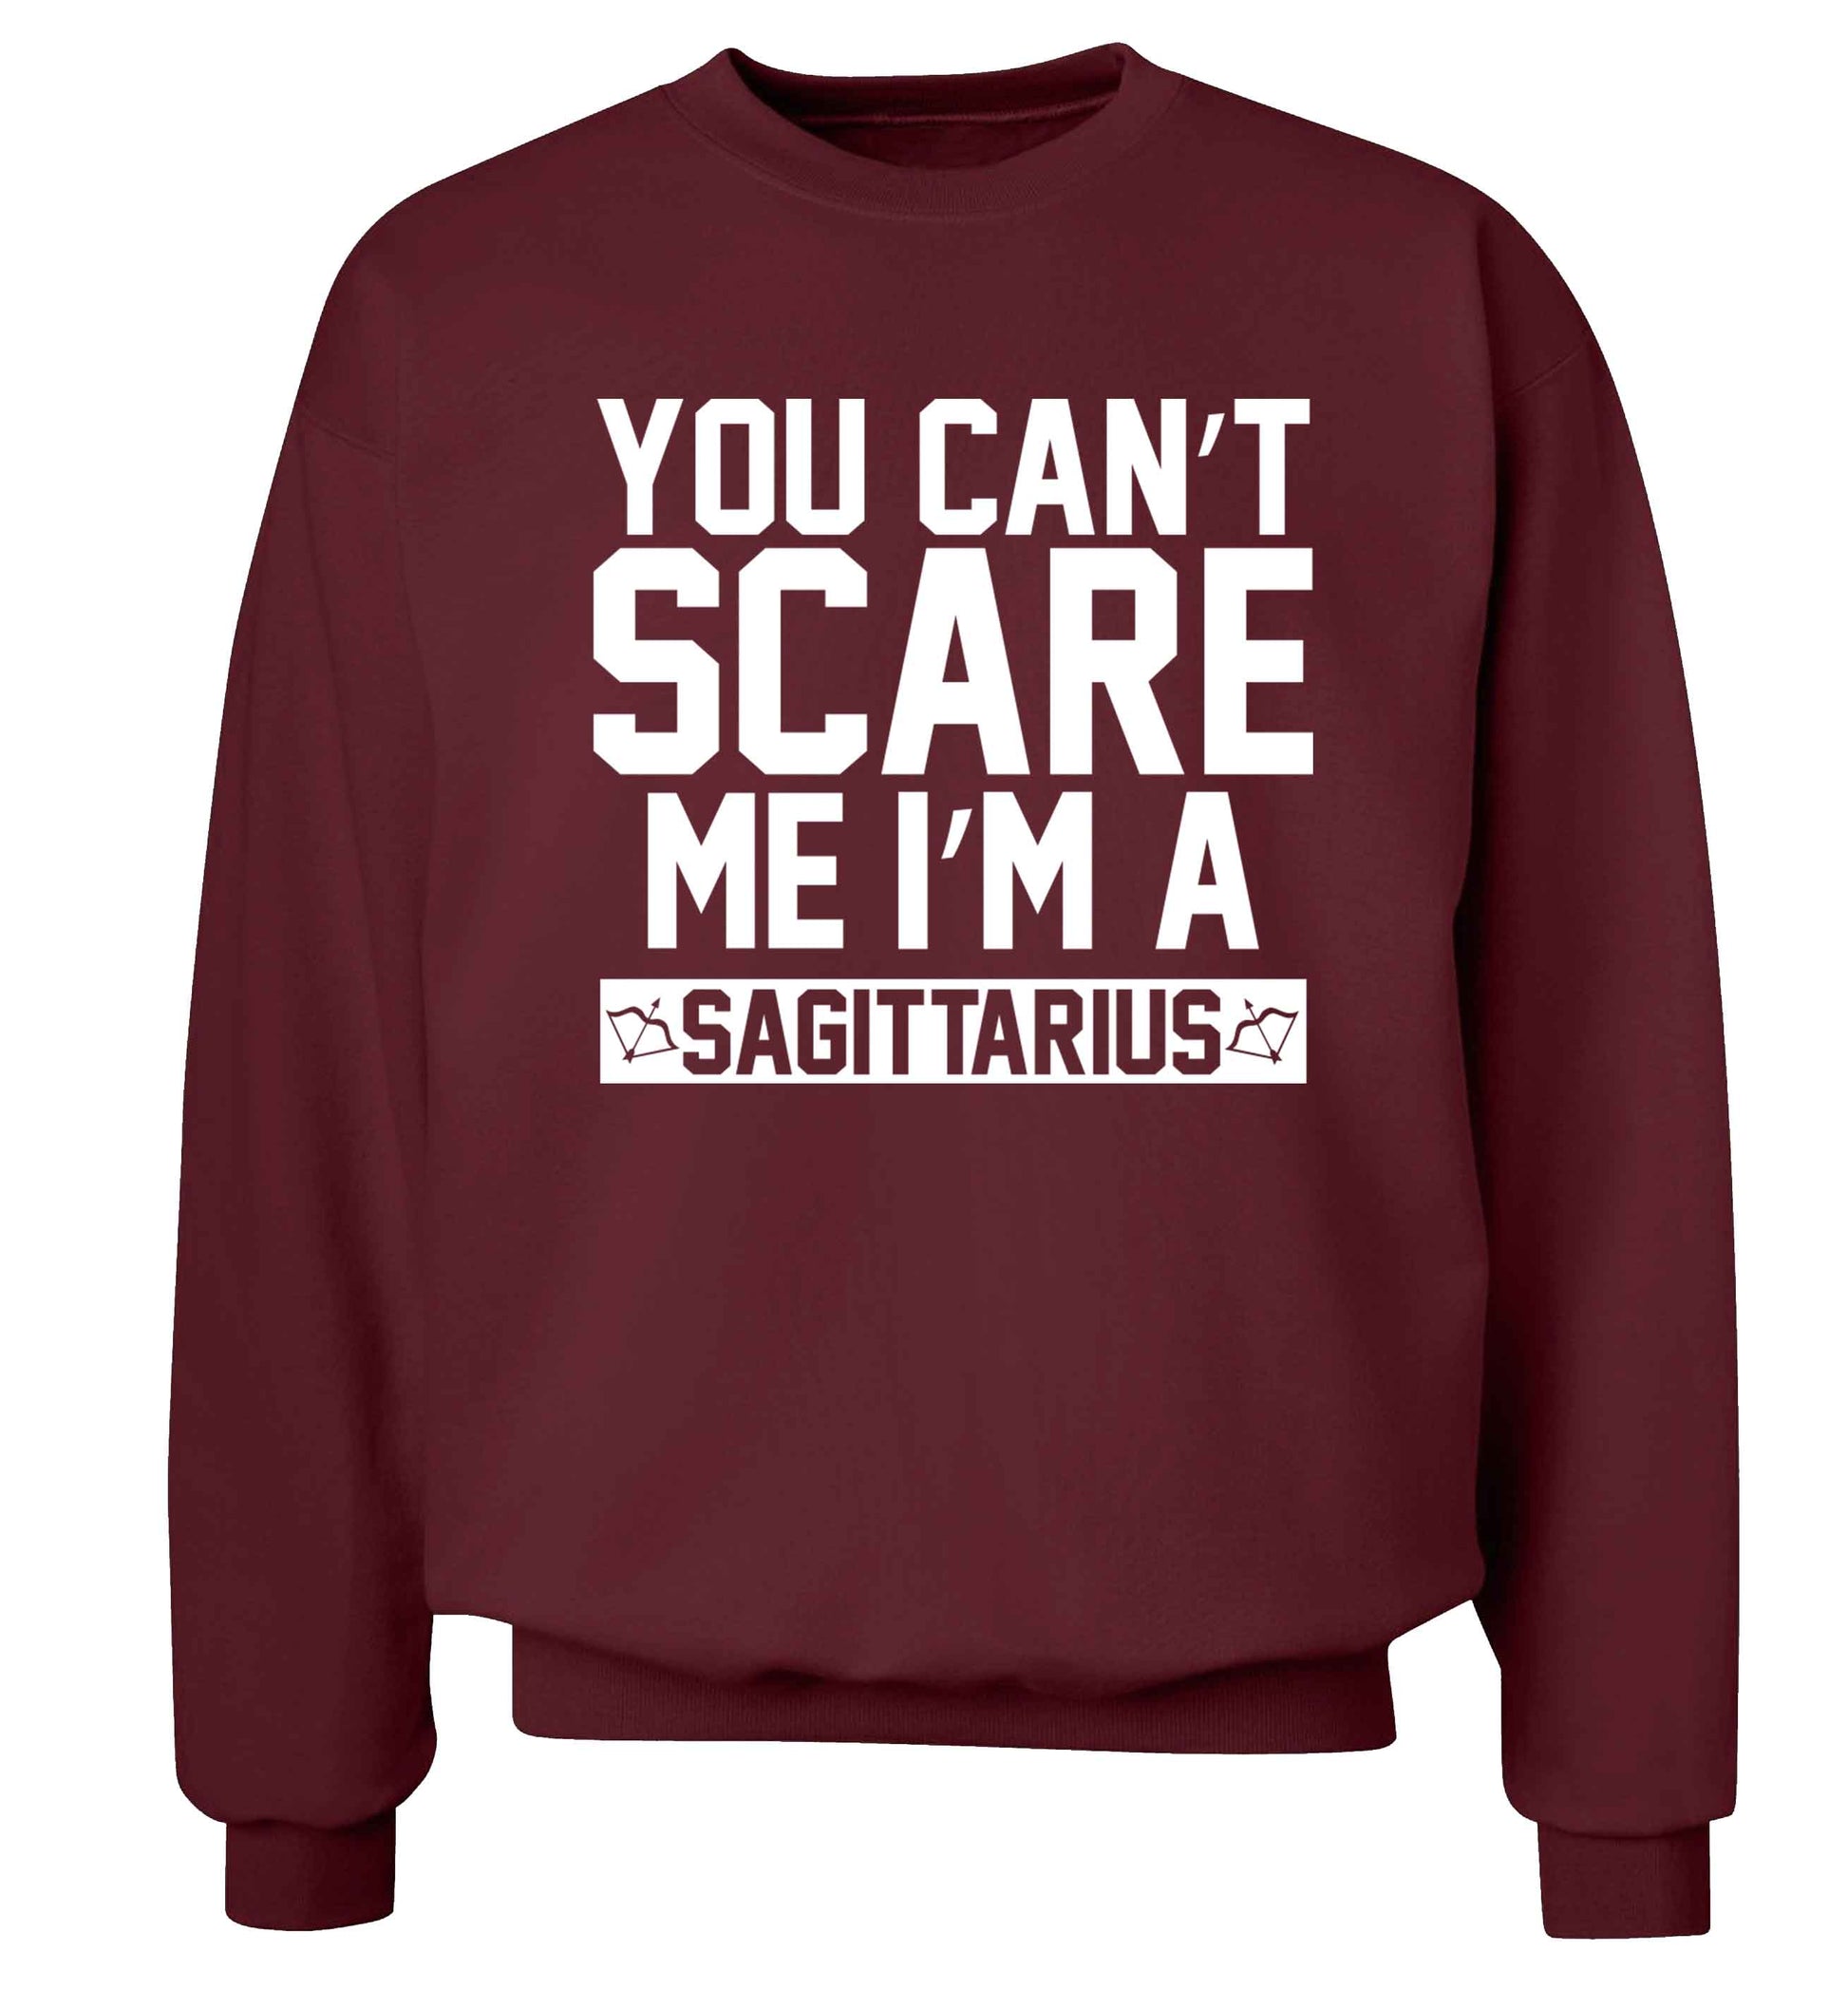 You can't scare me I'm a sagittarius Adult's unisex maroon Sweater 2XL